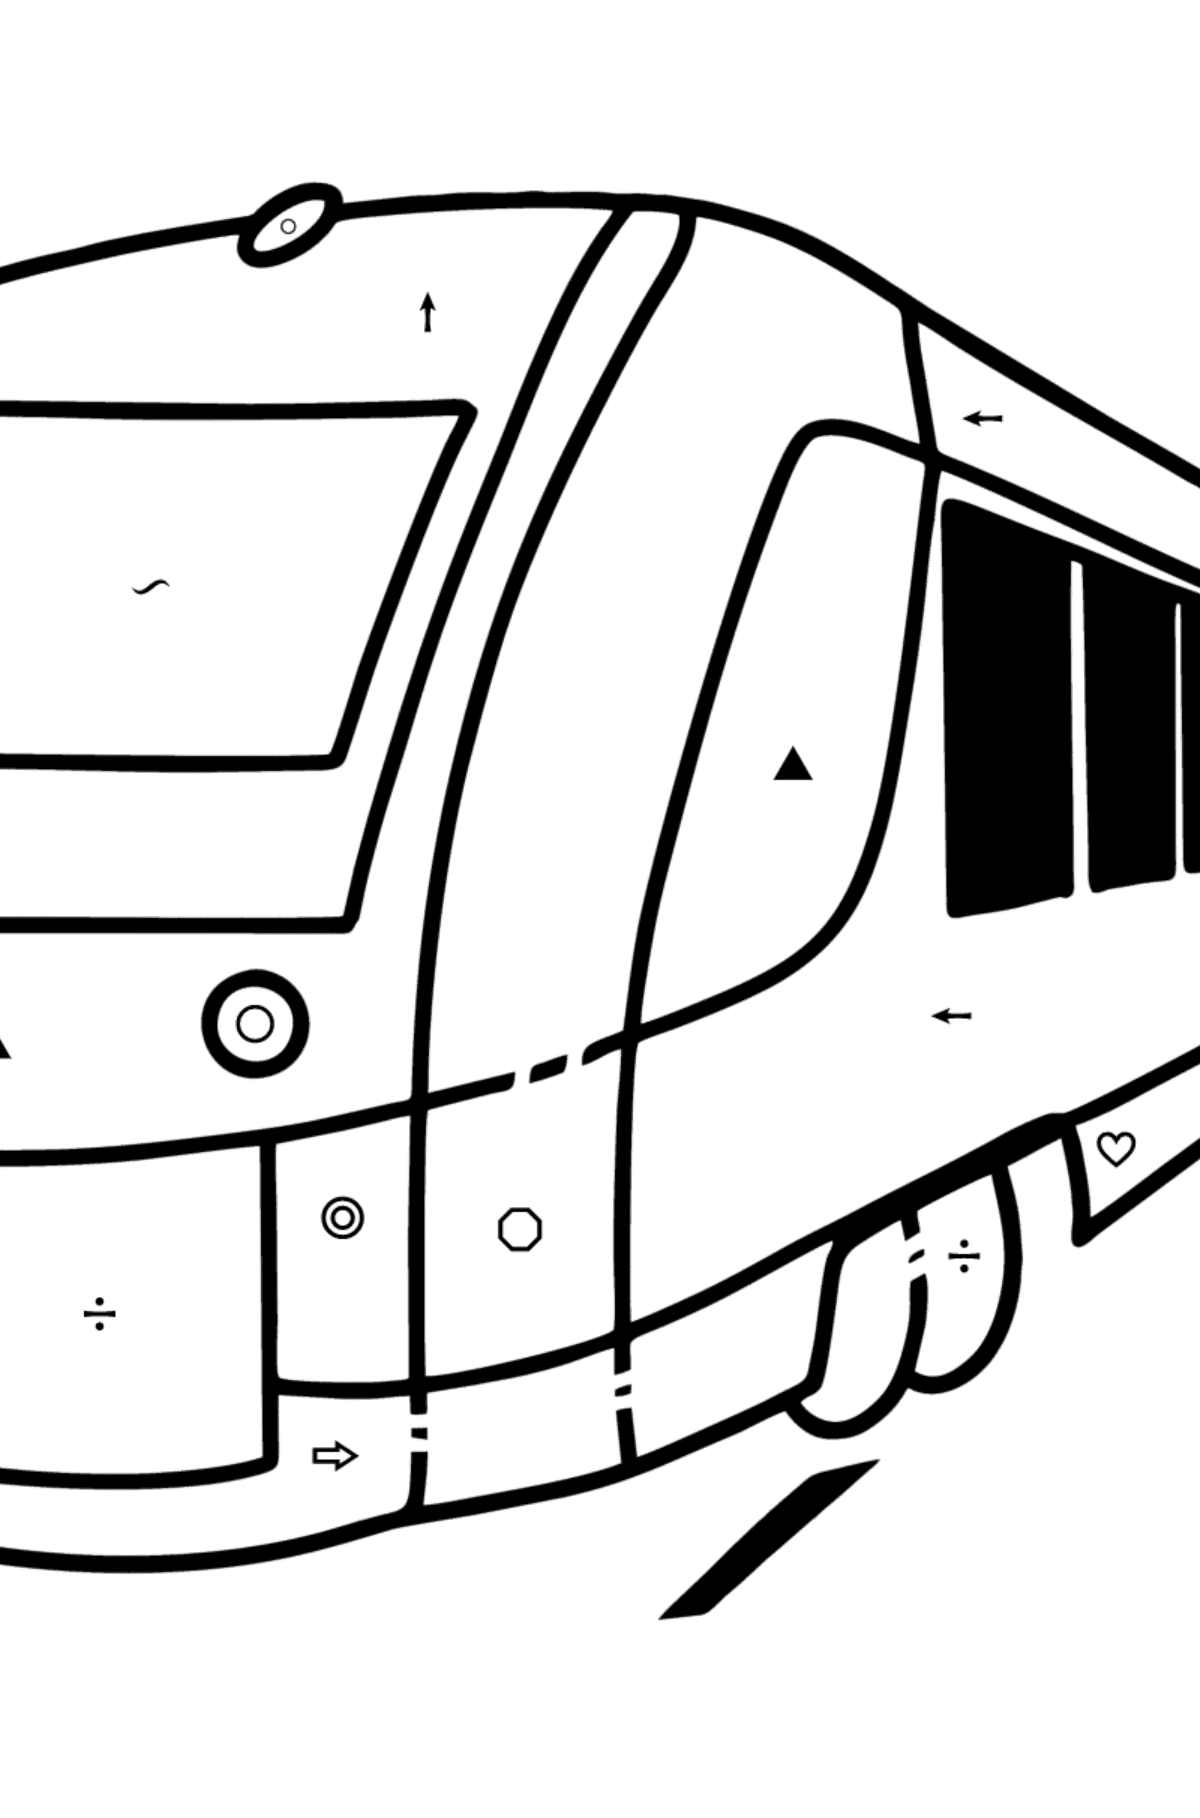 City Train coloring page - Coloring by Symbols and Geometric Shapes for Kids